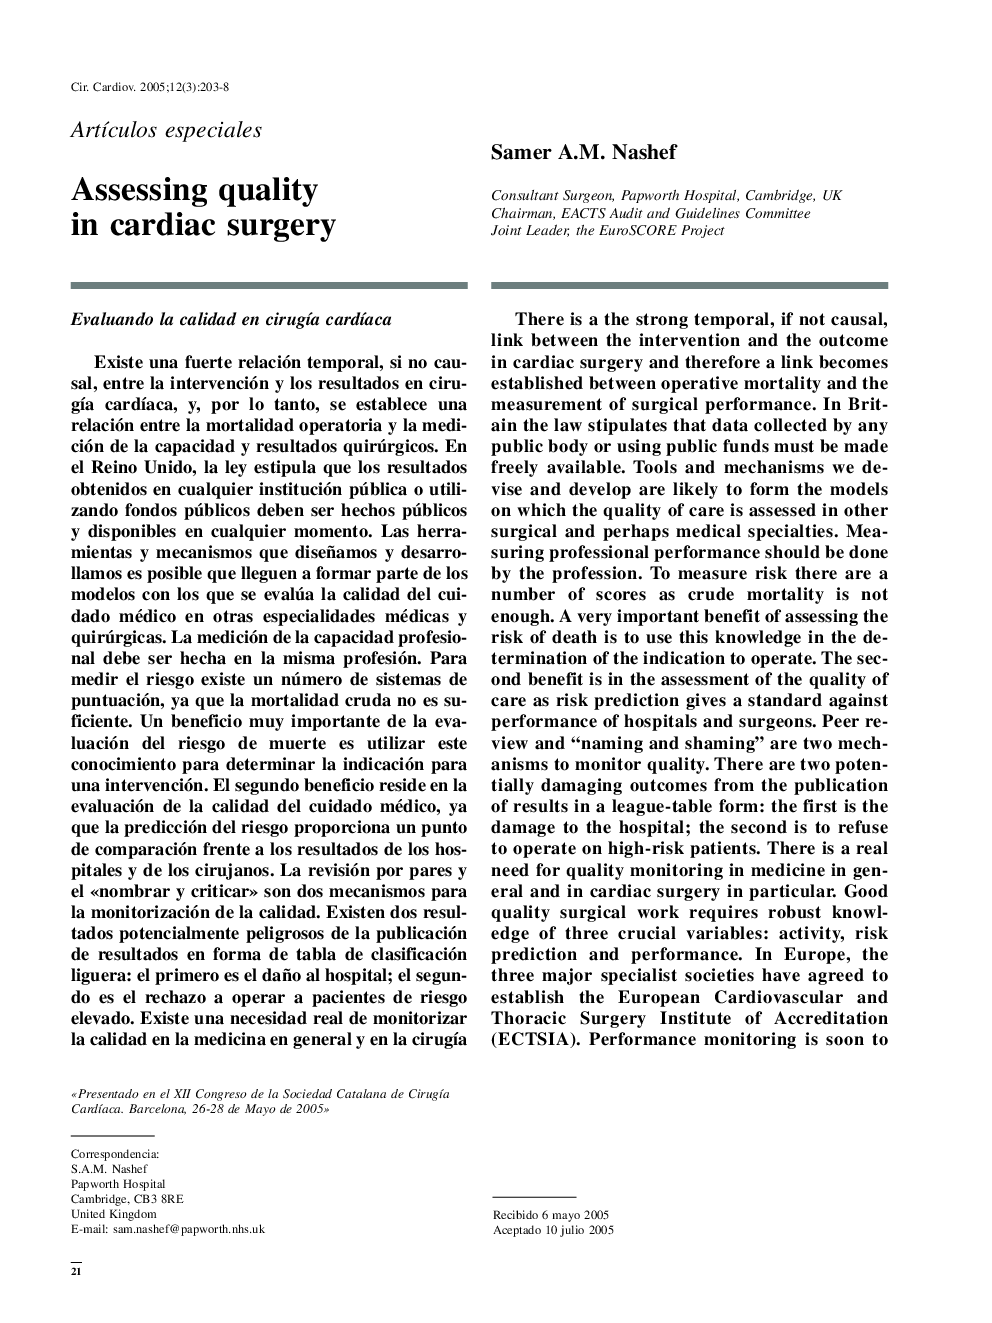 Assessing quality in cardiac surgery